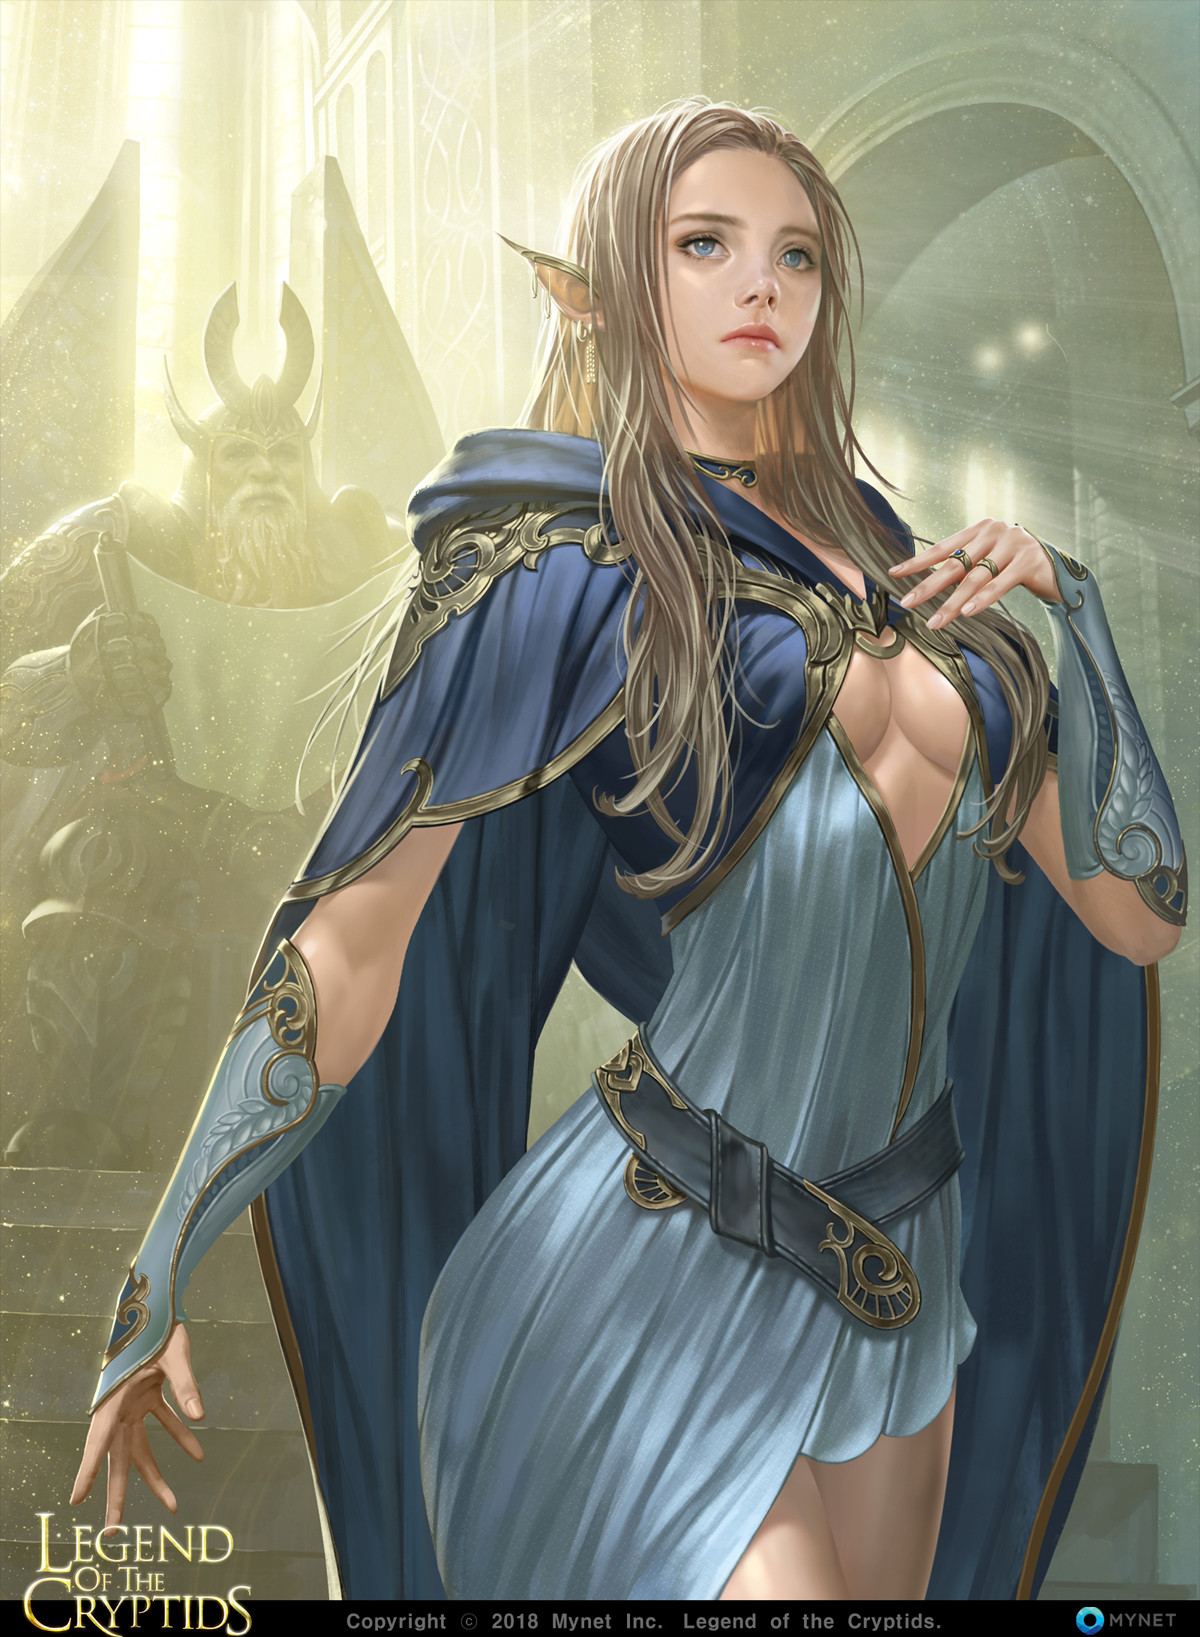 General 1200x1637 Donfoo drawing women elves blonde looking away blue eyes cape mantle cleavage dress blue clothing stairs Legend of the Cryptids